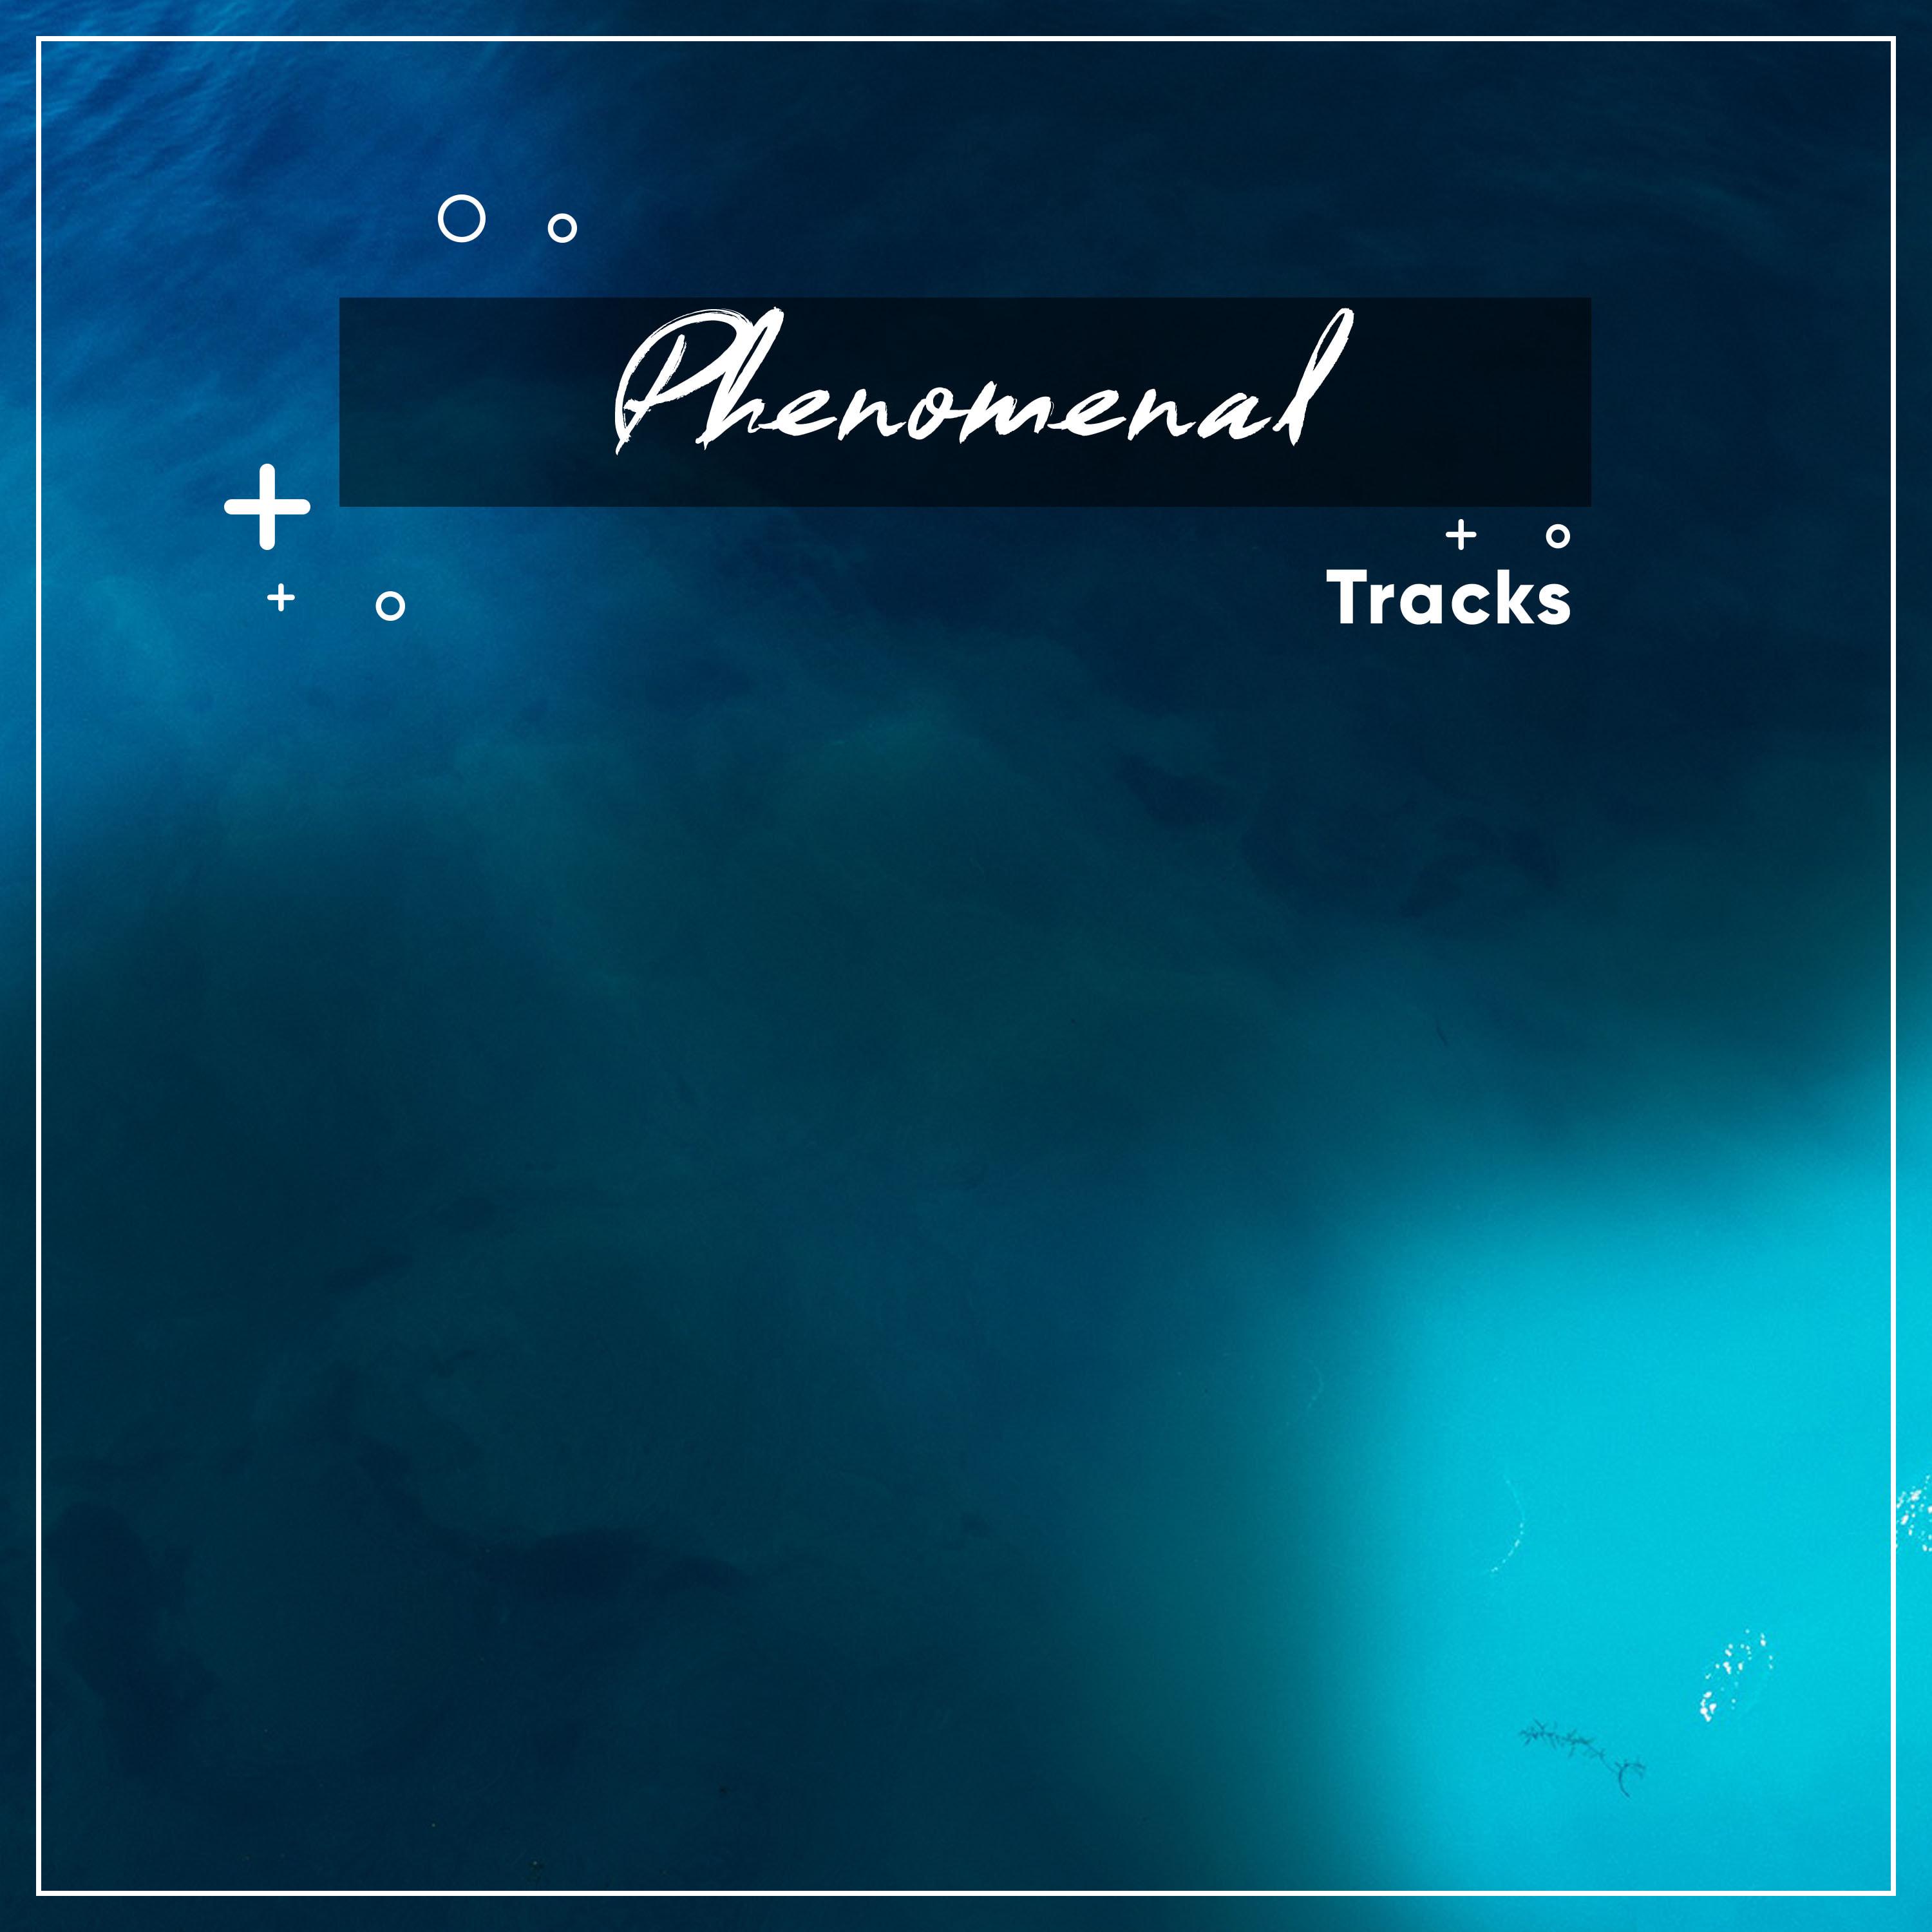 #11 Phenomenal Tracks for Spa & Relaxation